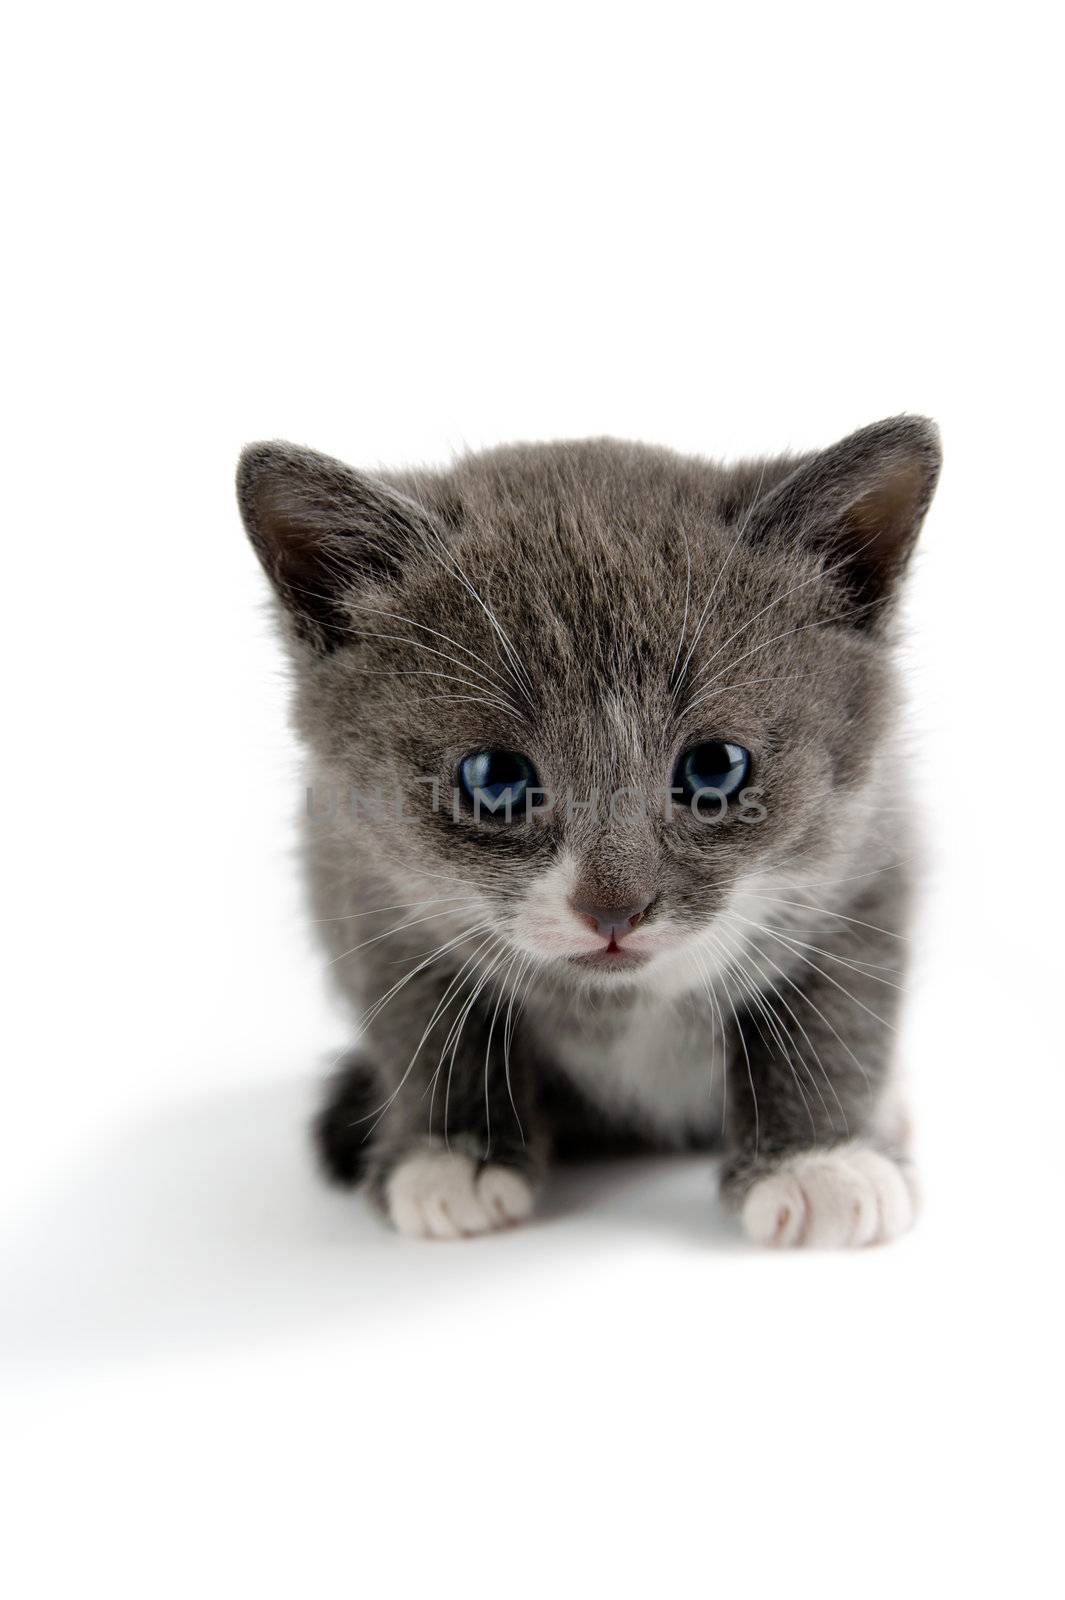 An image of a tiny grey kitten on white background